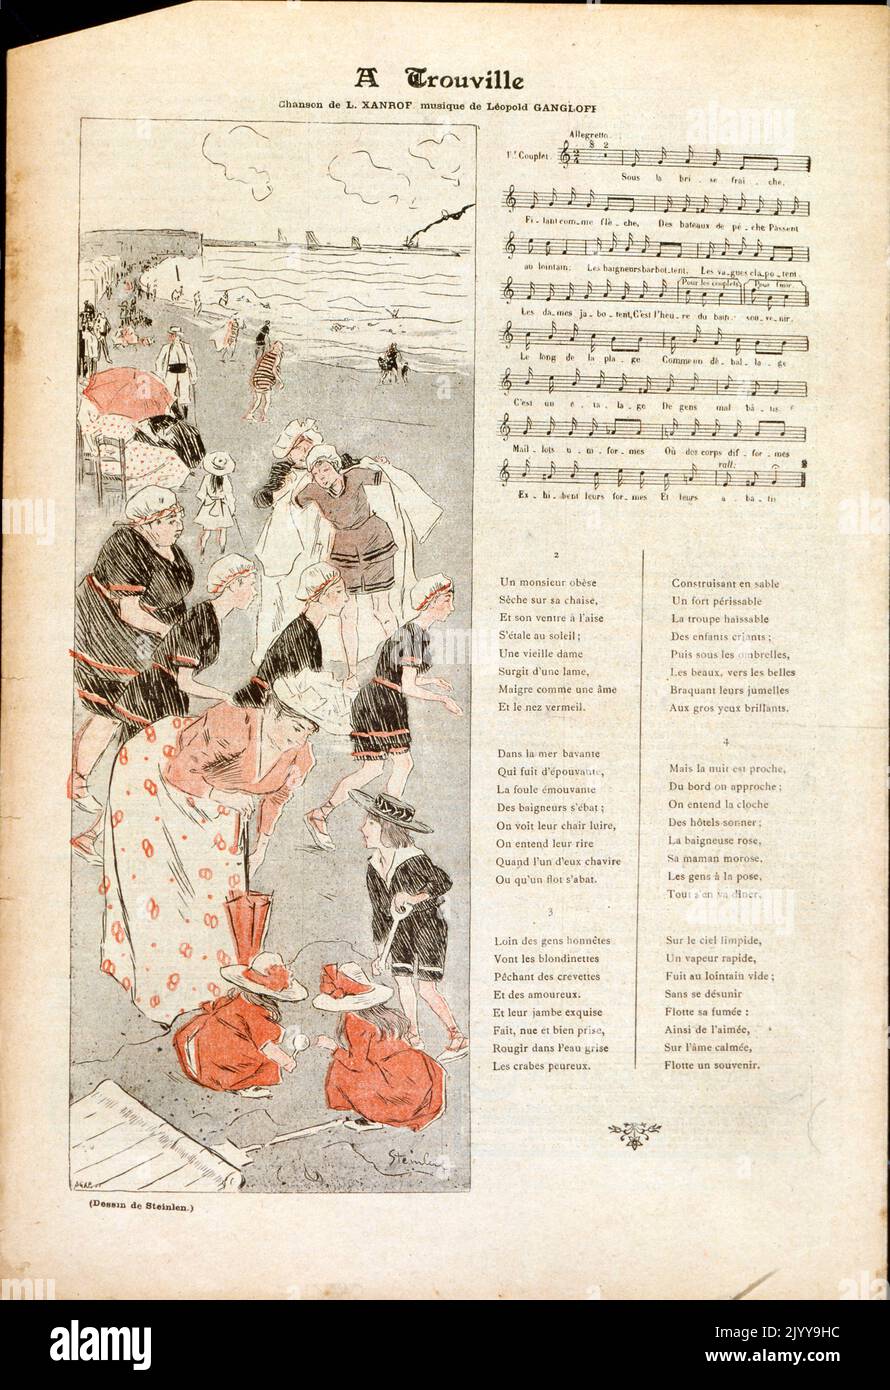 Coloured illustrated music score called 'Atrouville'. Lyrics by L Xanrop and music by Leopold Ganglops. People at the beach. From 'In the streets: Songs and Monologues' of Aristide Bruant (1851-1925). Stock Photo